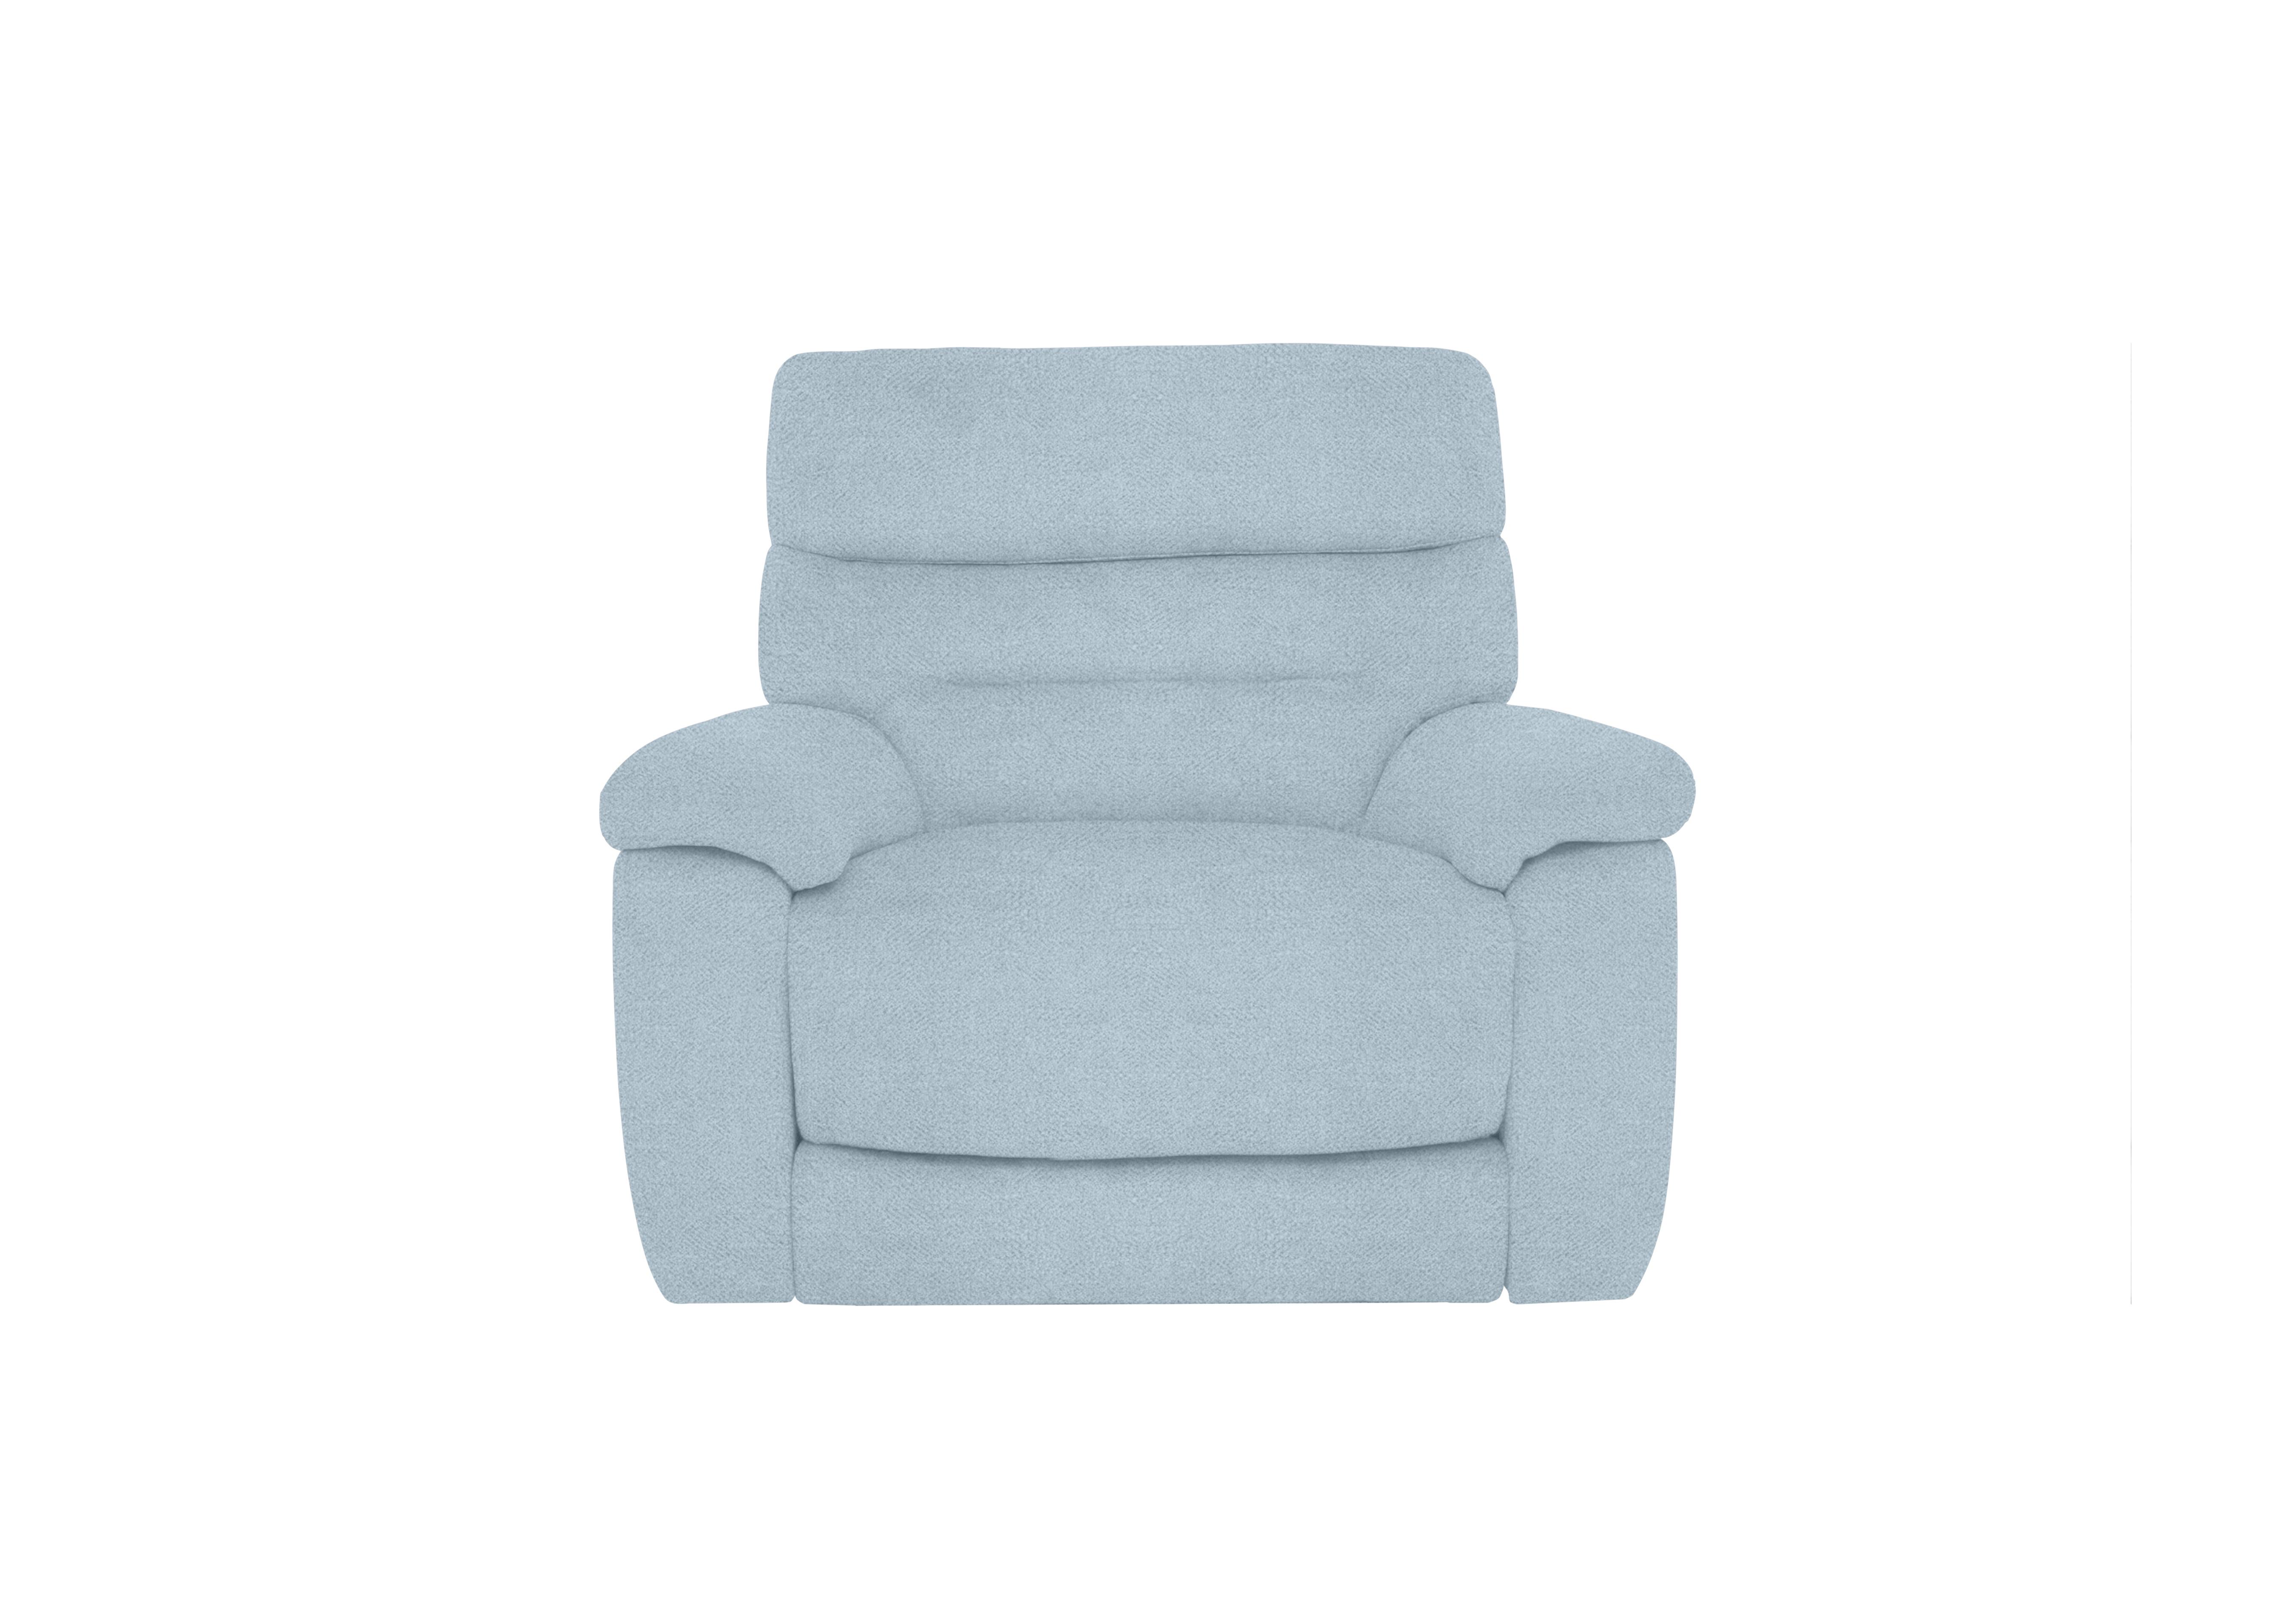 Nimbus Fabric Chair in Fab-Meo-R17 Baby Blue on Furniture Village